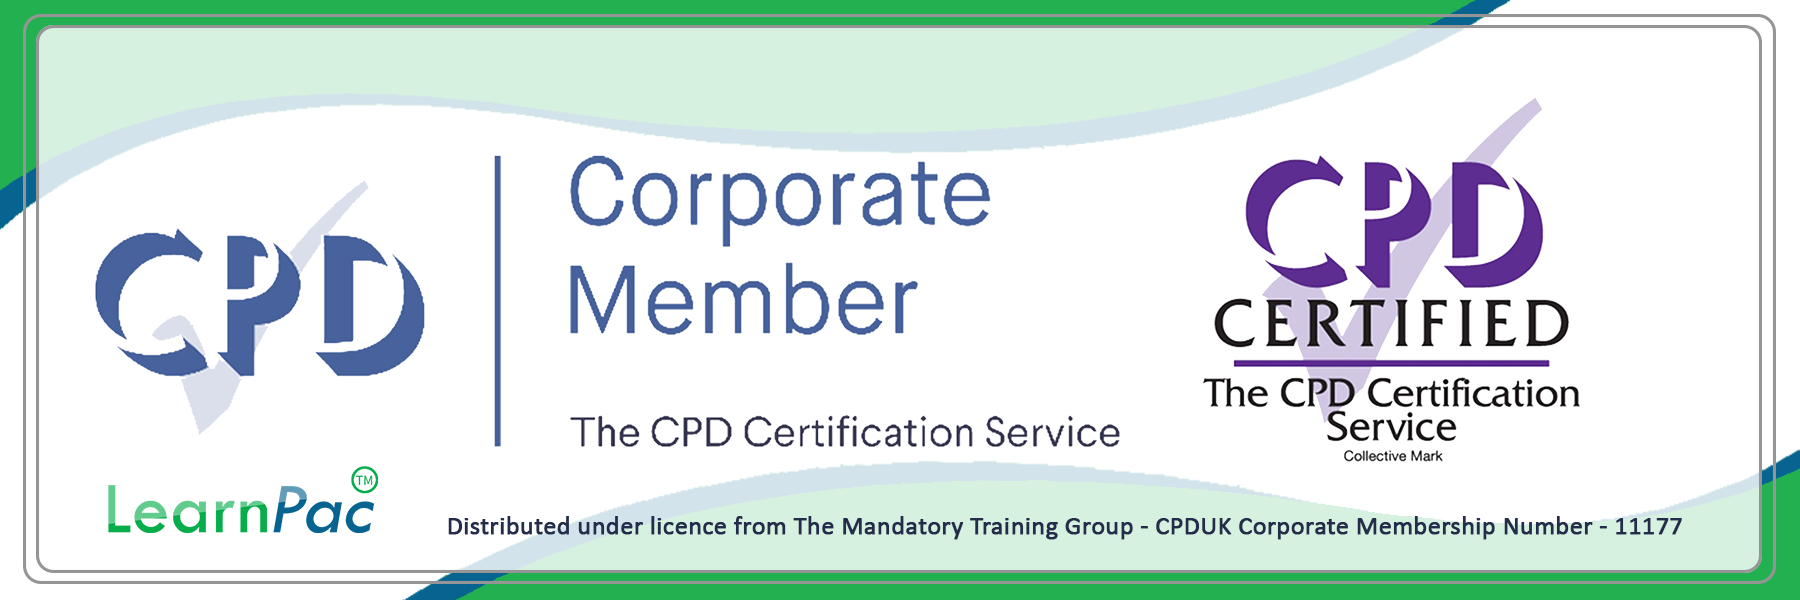 Statutory Training for Organisations Licenses Pricing - E-Learning Courses Providers - CPD - Learnpac Systems UK -